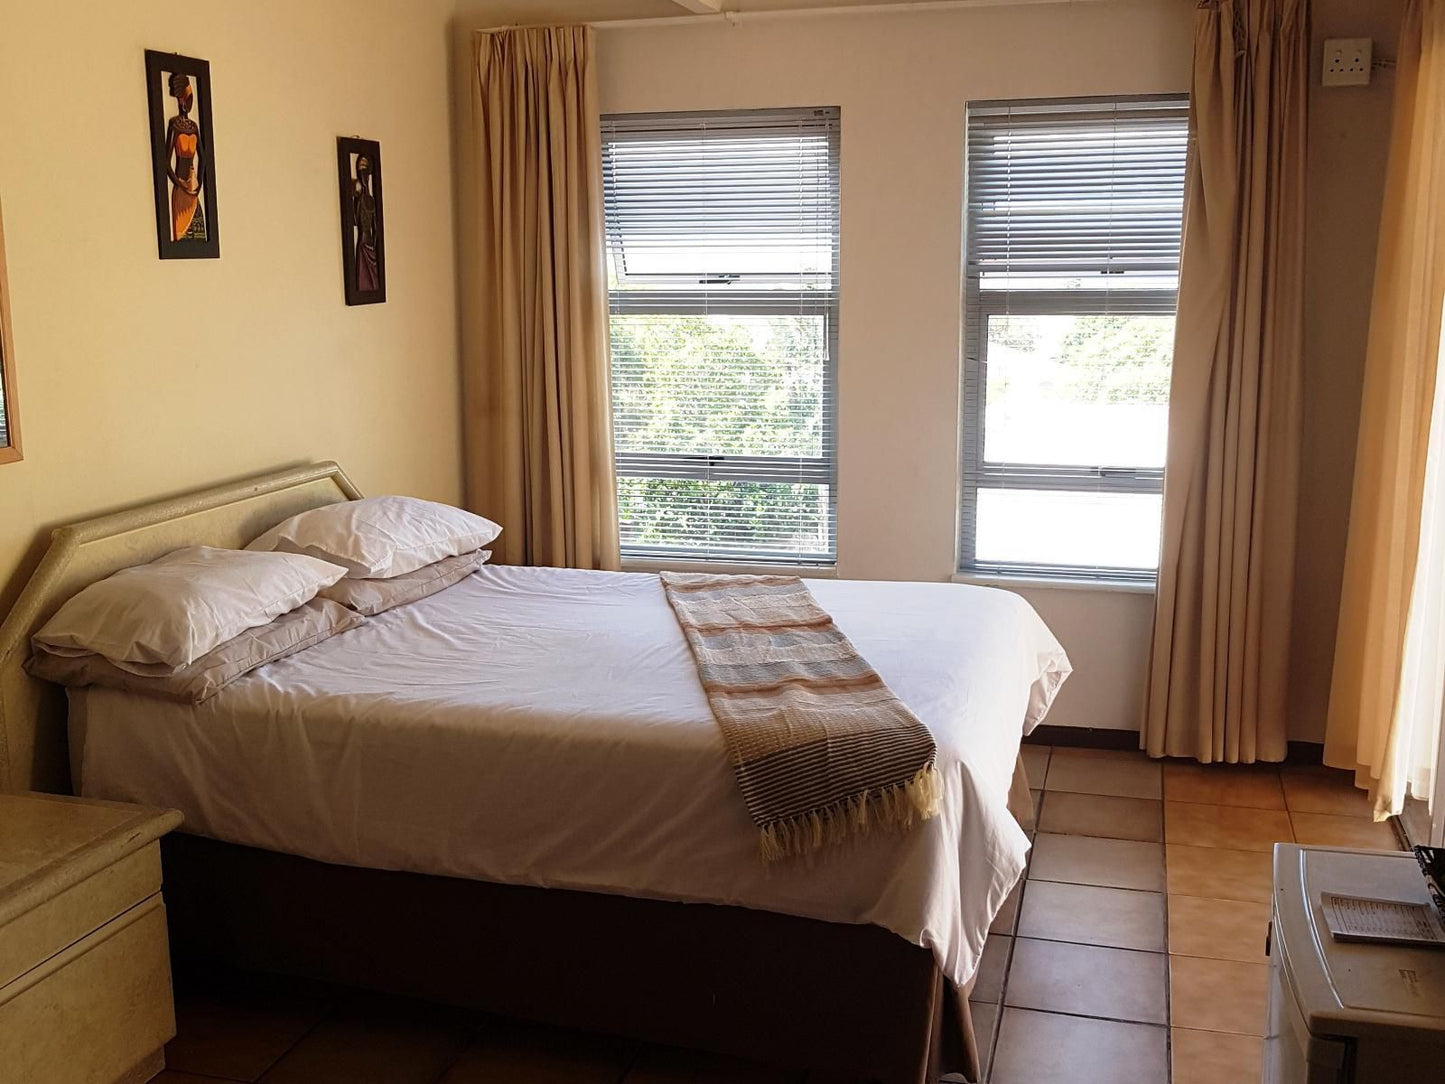 Amakaya Backpackers Travellers Accommodation Plett Central Plettenberg Bay Western Cape South Africa 